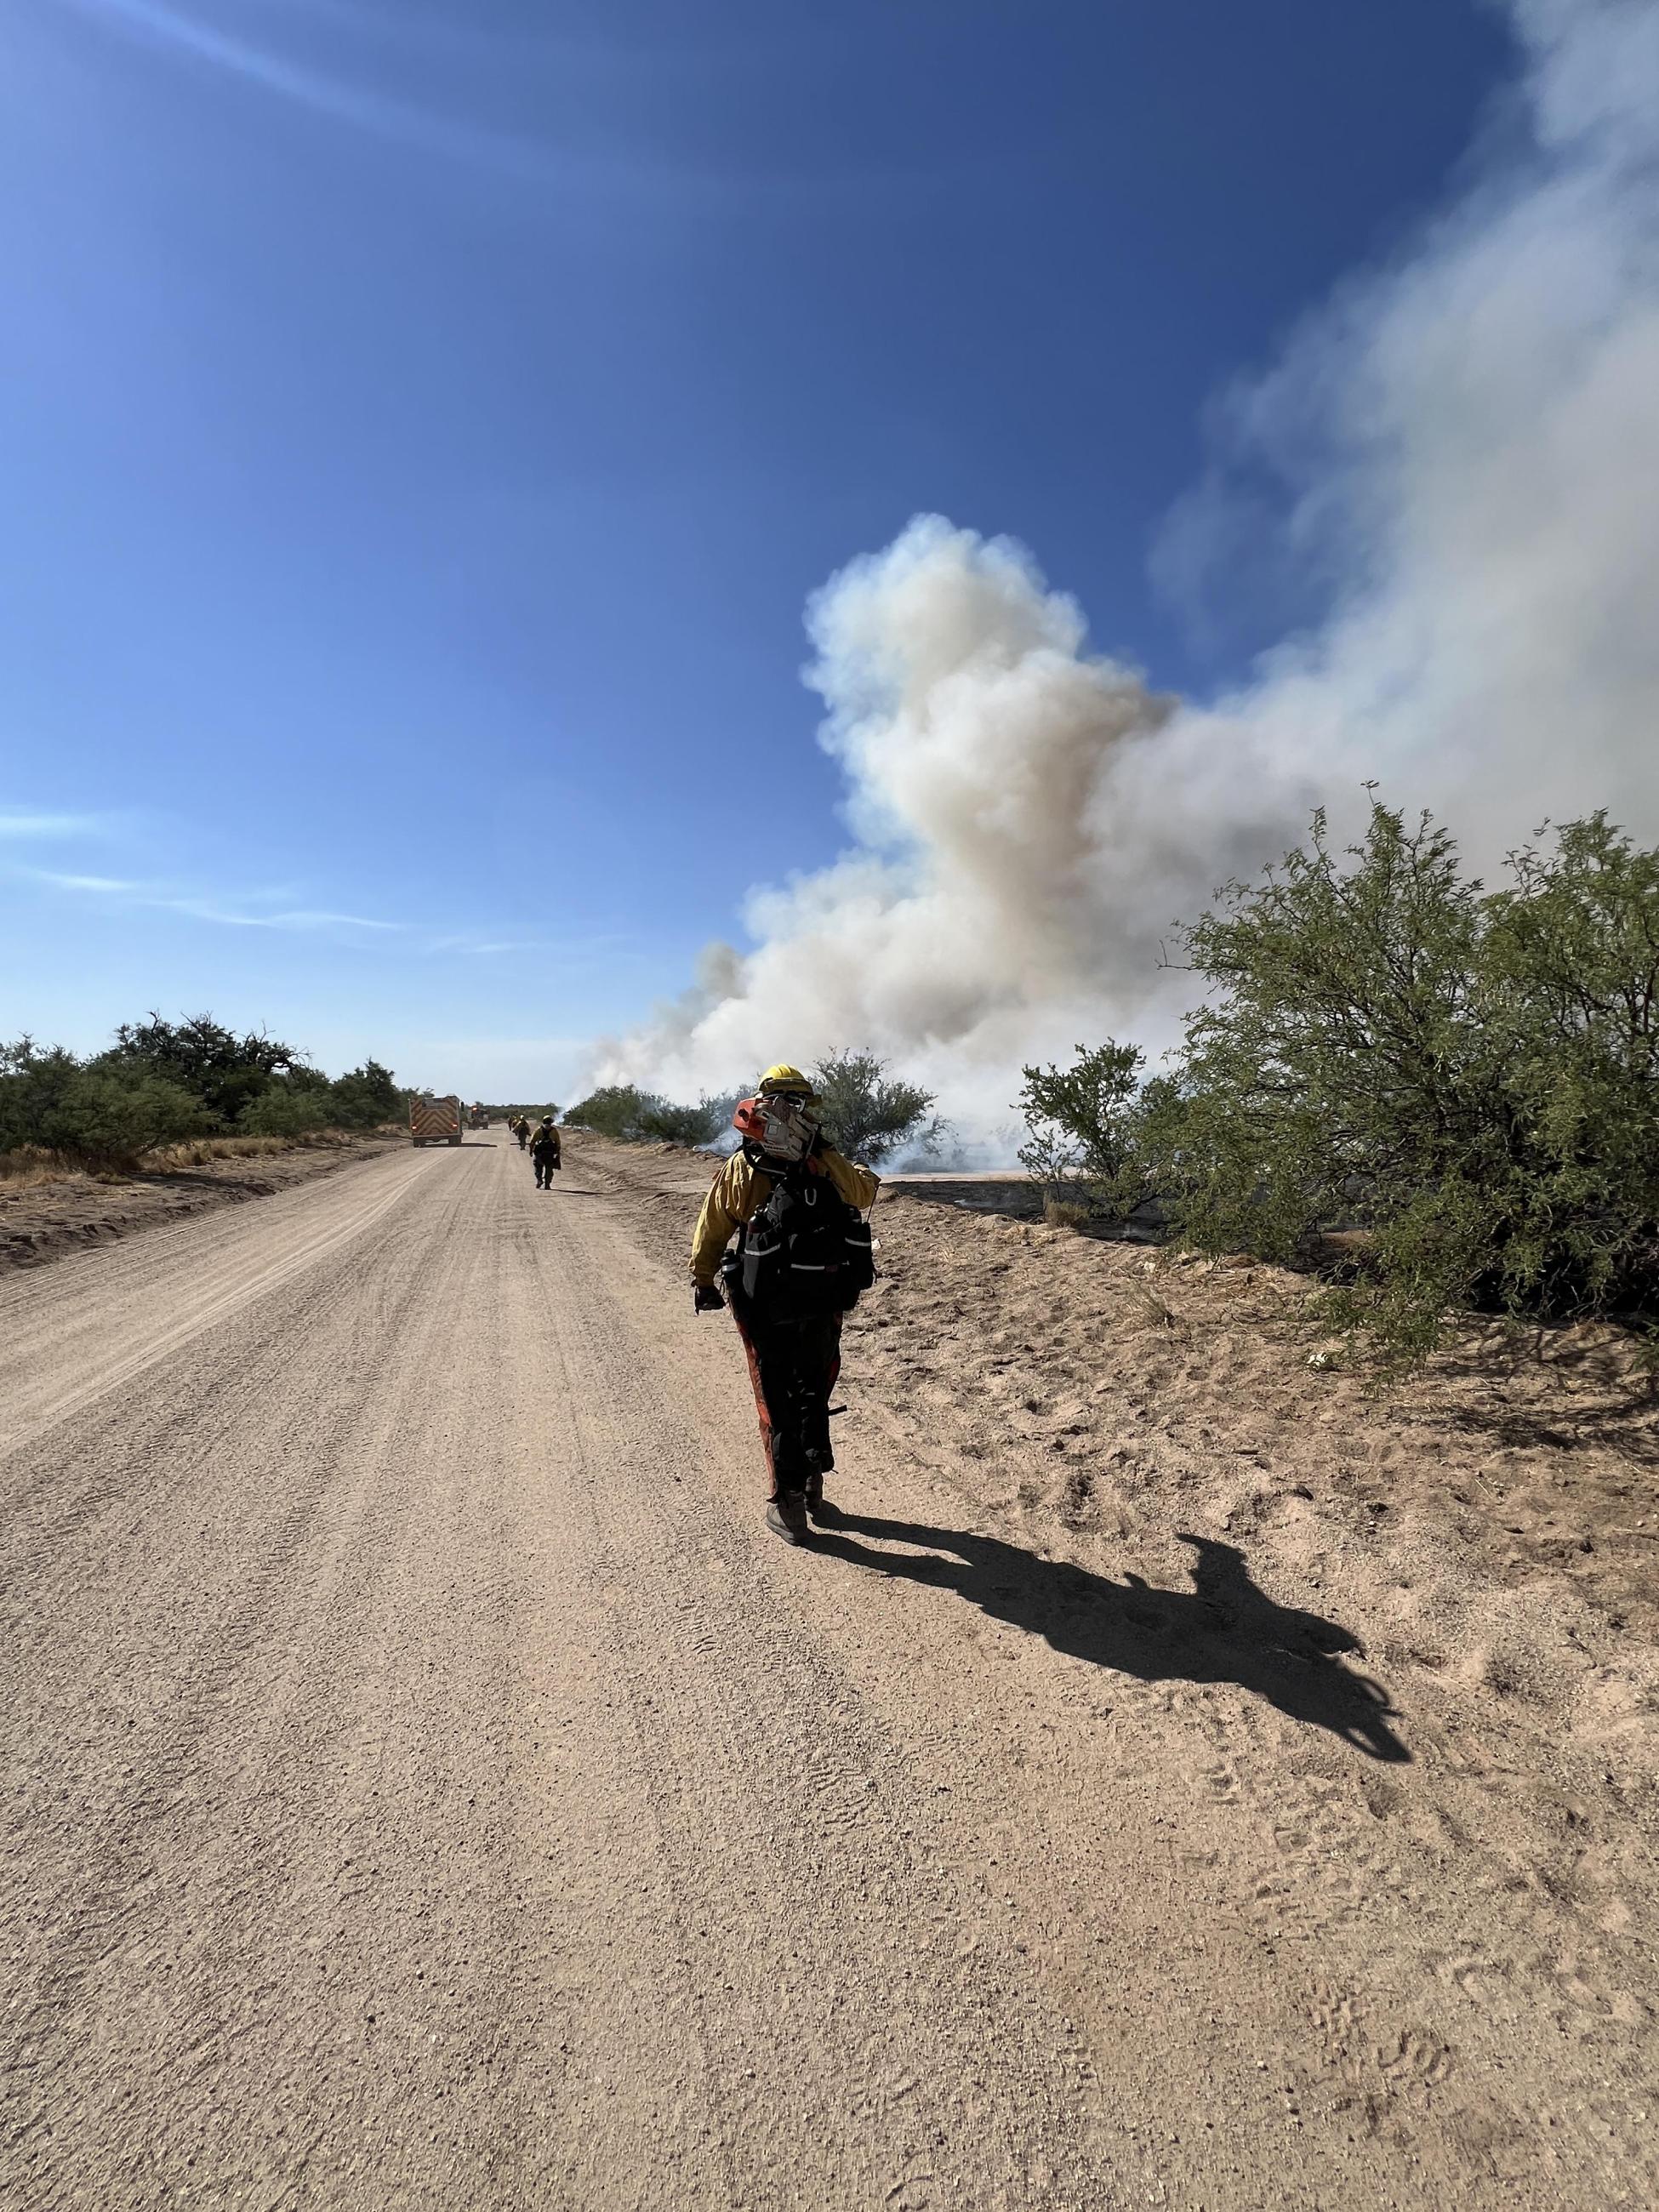 Firefighter carrying chainsaw walks down dirt road with smoke rising in background against blue sky